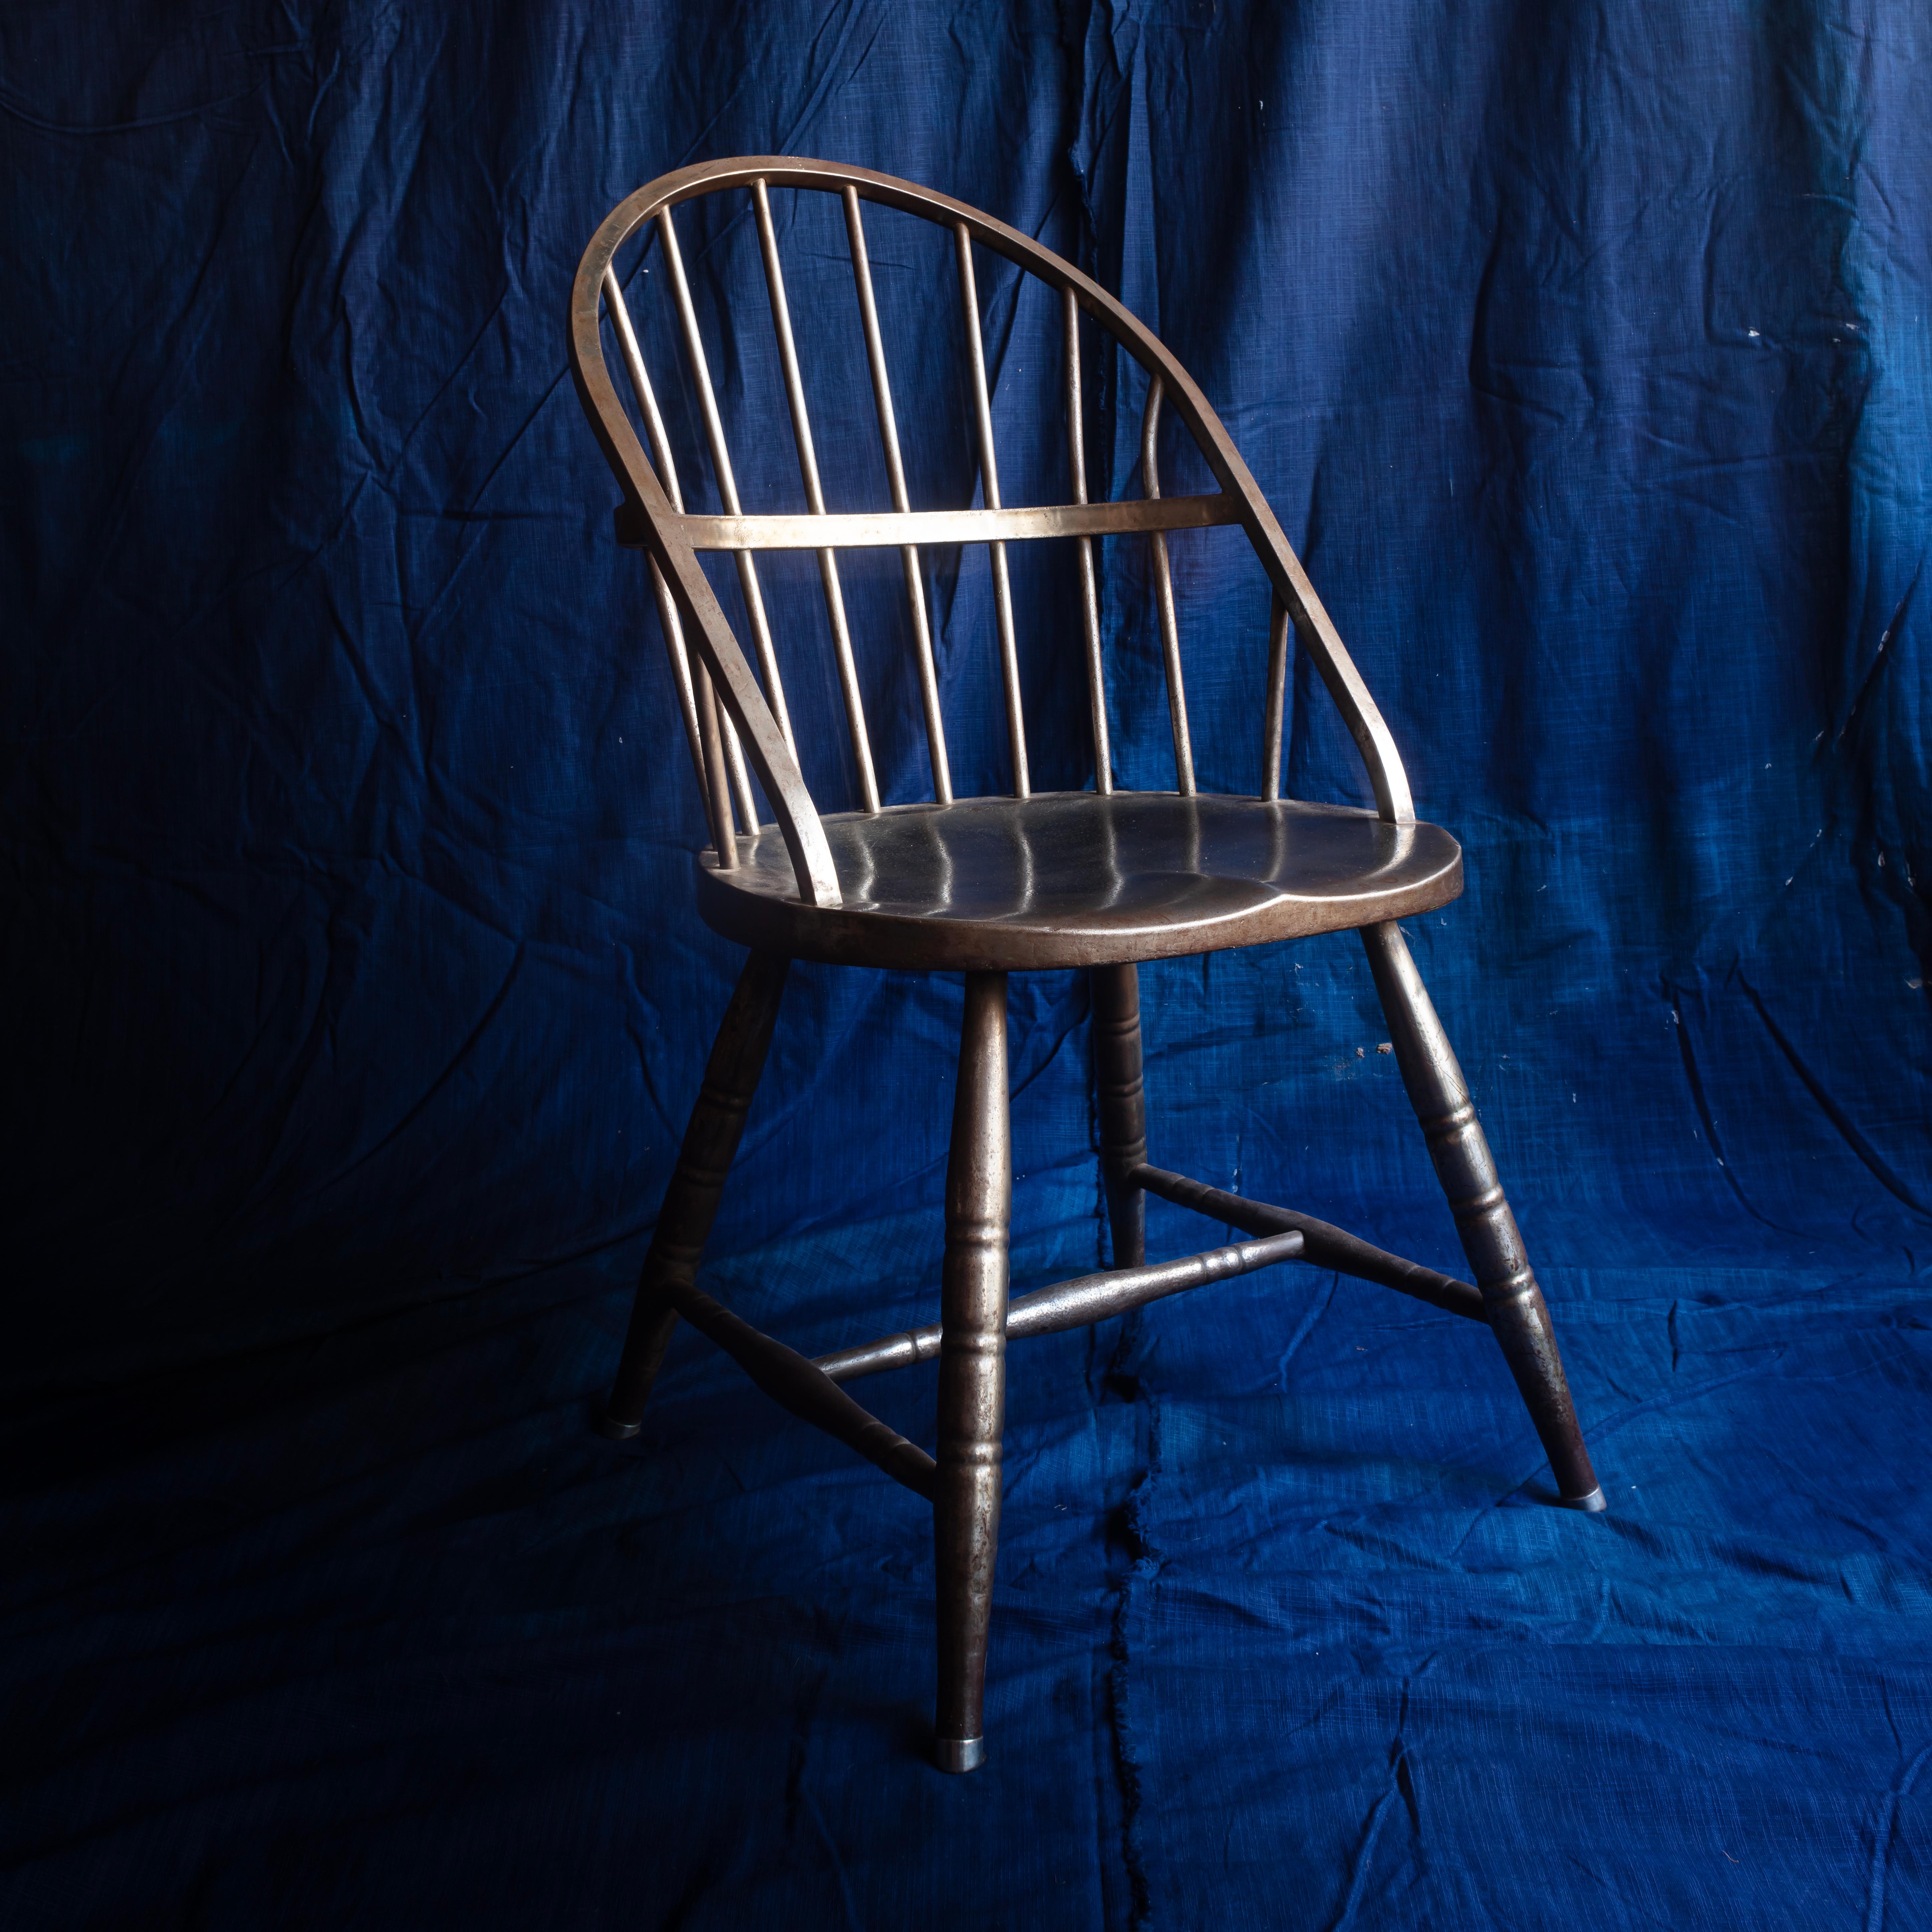 Chairs of this type were popular at the turn of the century, this model relates to a large group made for the Central Library of the Free Library of Philadelphia by the Canton Metal Company of New York in the 1920s
Dimensions: Height: 91 x Width: 52